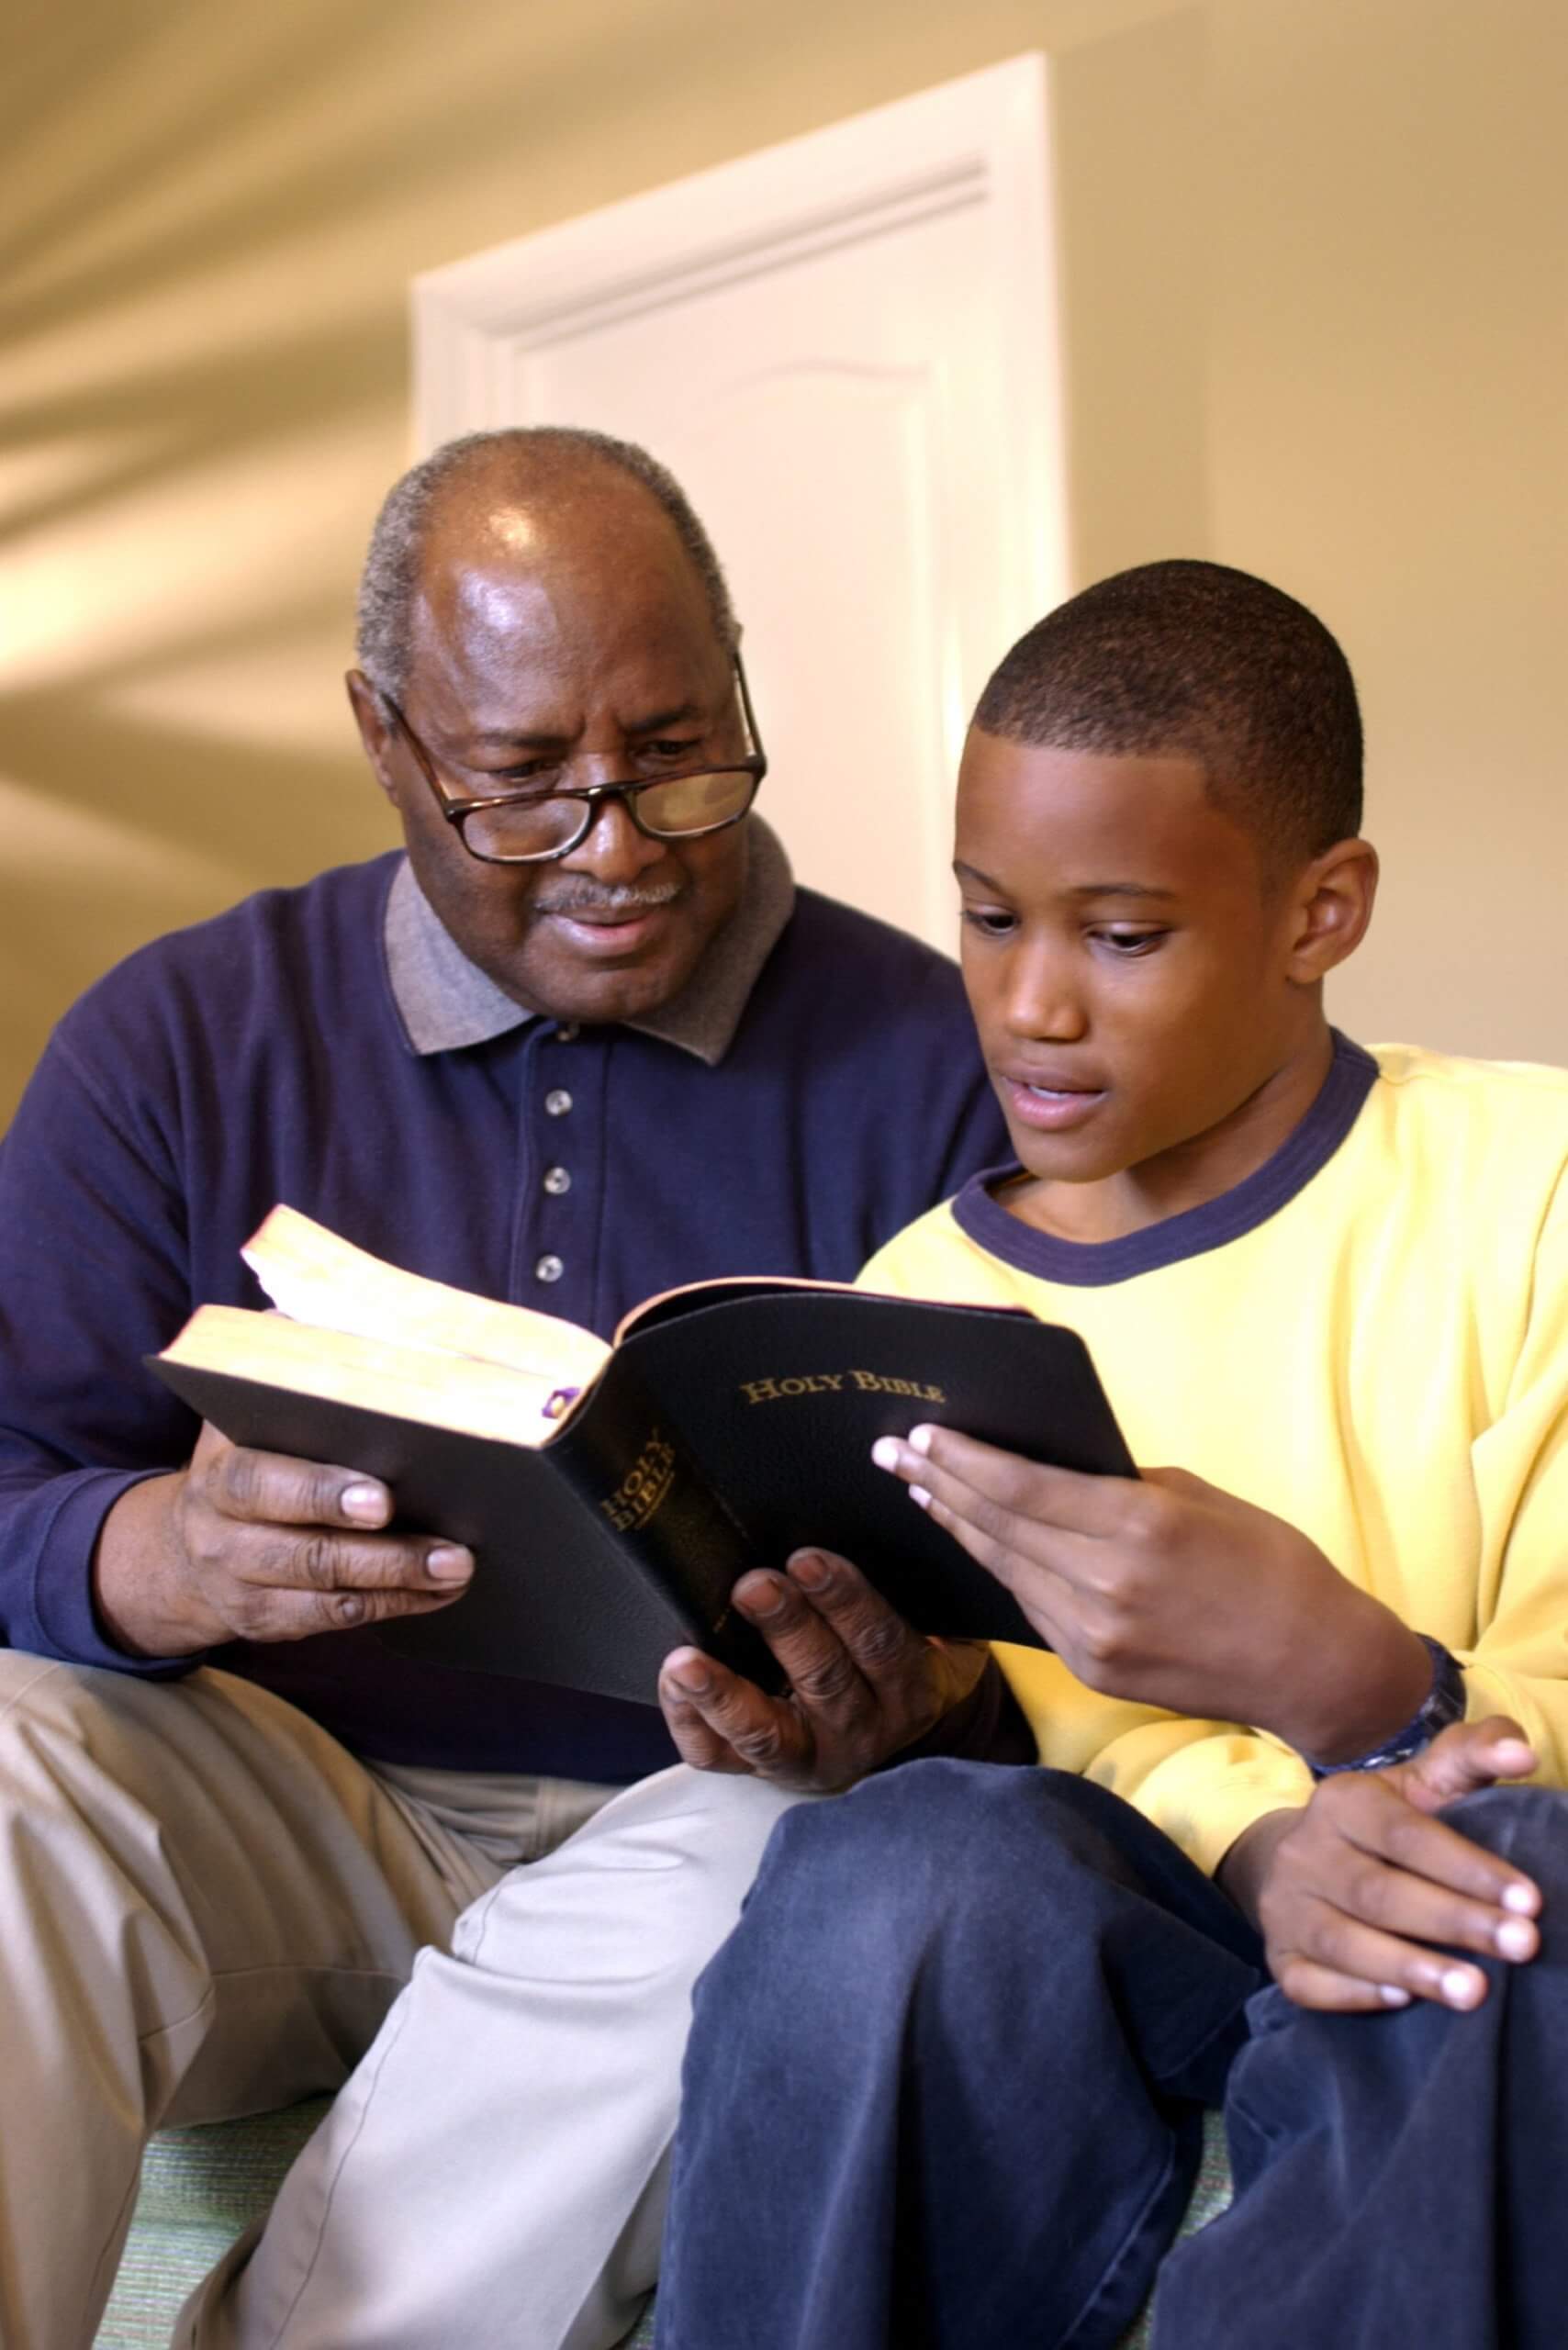 grandfather and grandson reading bible training